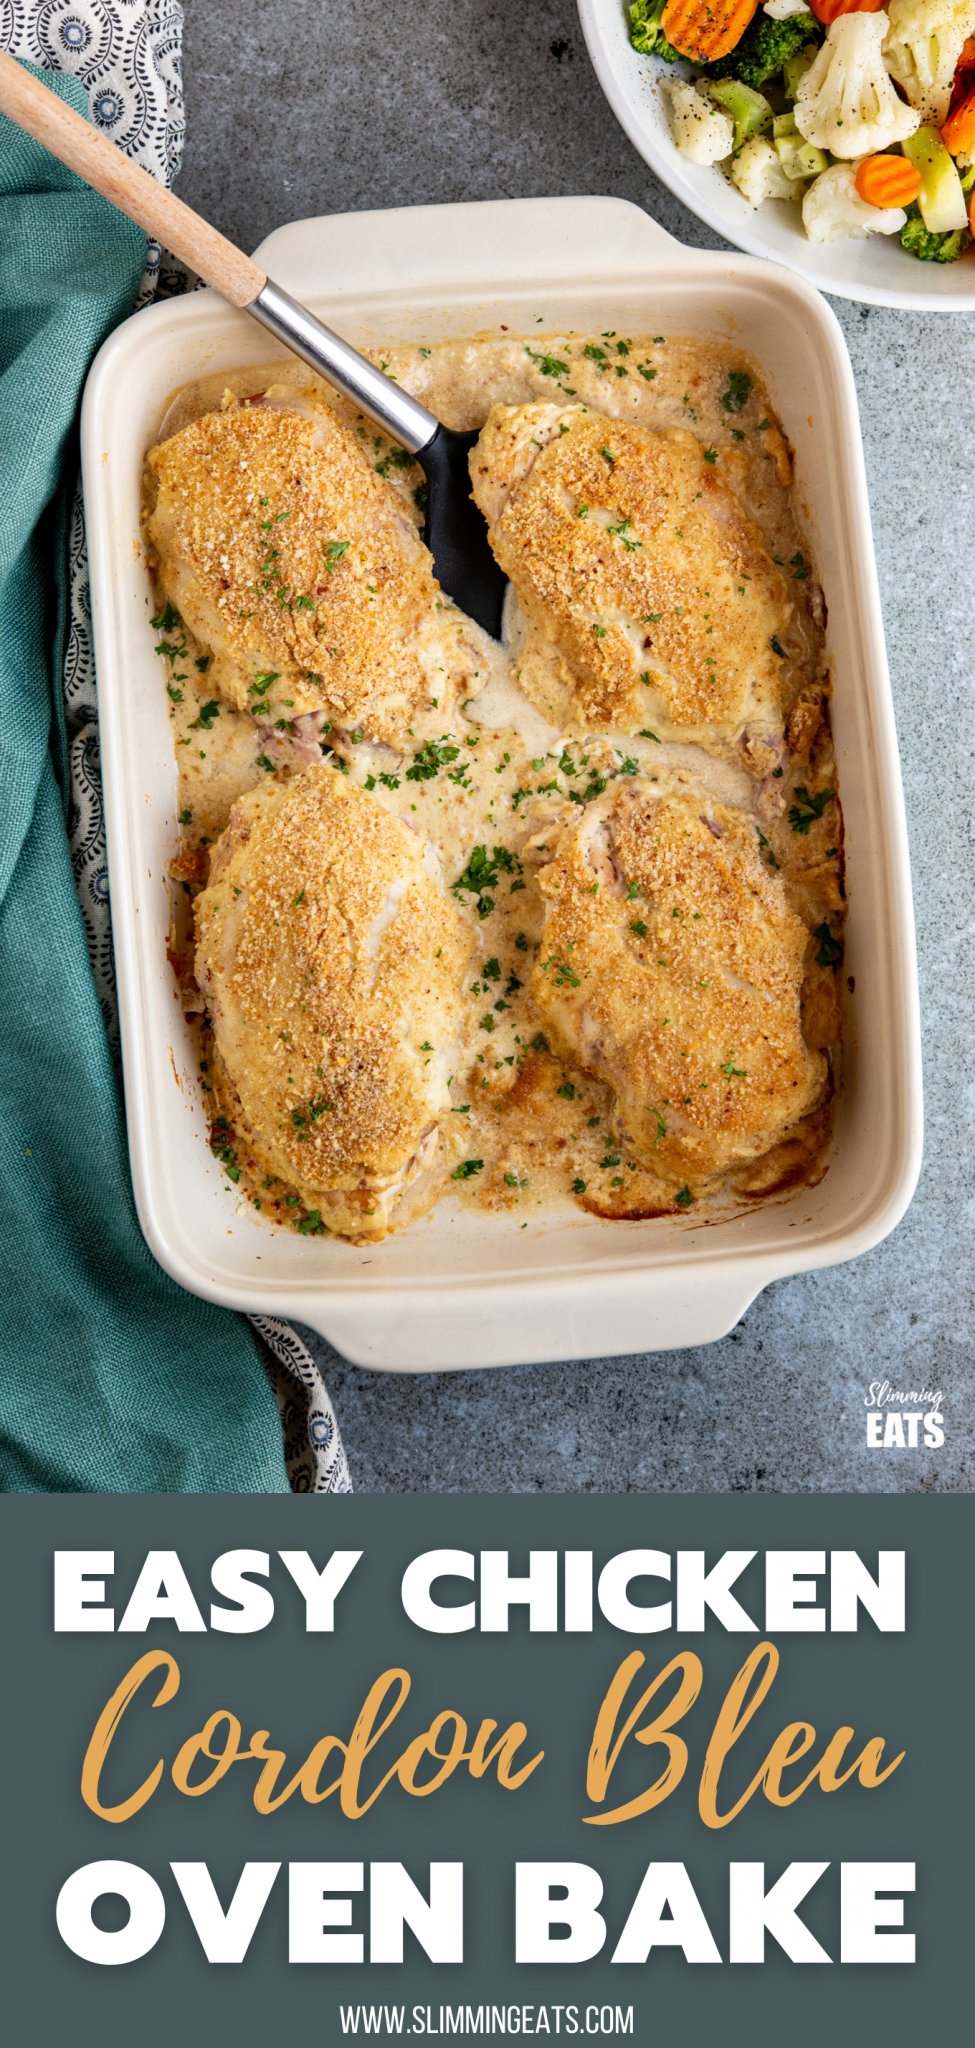 Easy Chicken Cordon Bleu in oven dish with bowl of vegetables above pin